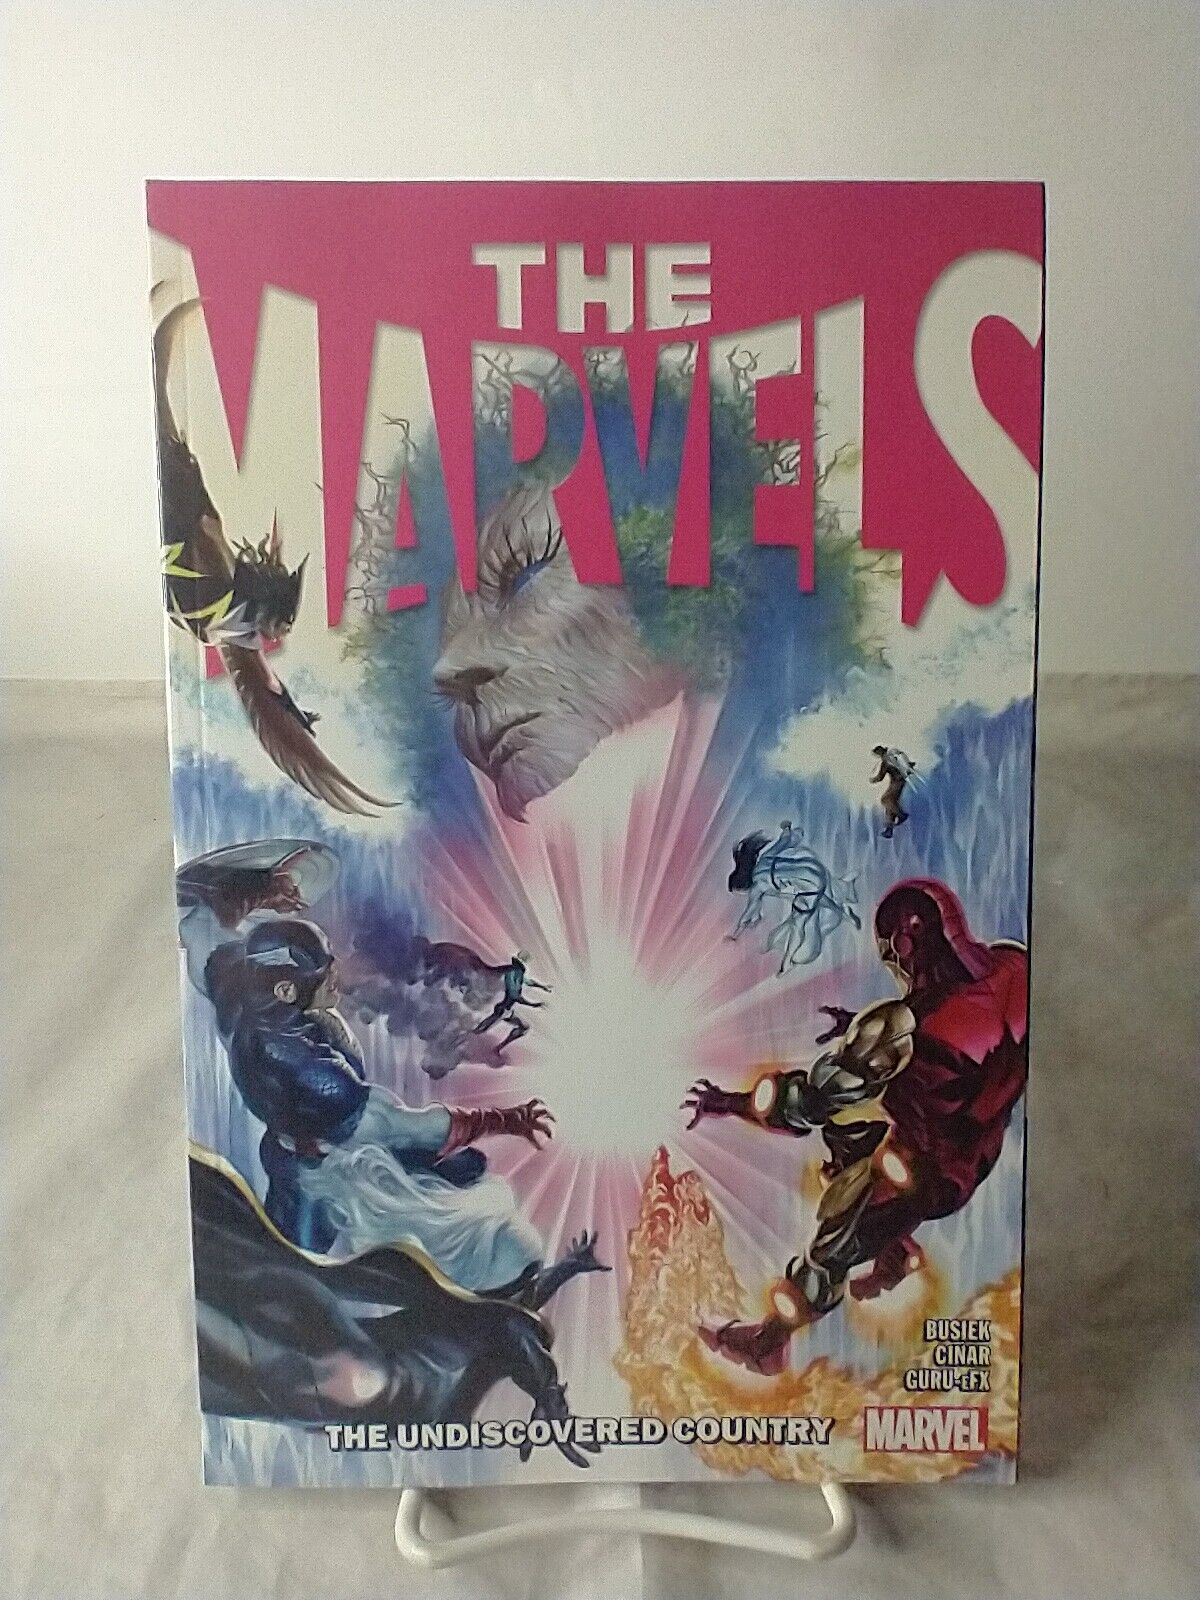 Marvel Comics The Marvels Vol. 2: The Undiscovered Country Trade Paperback